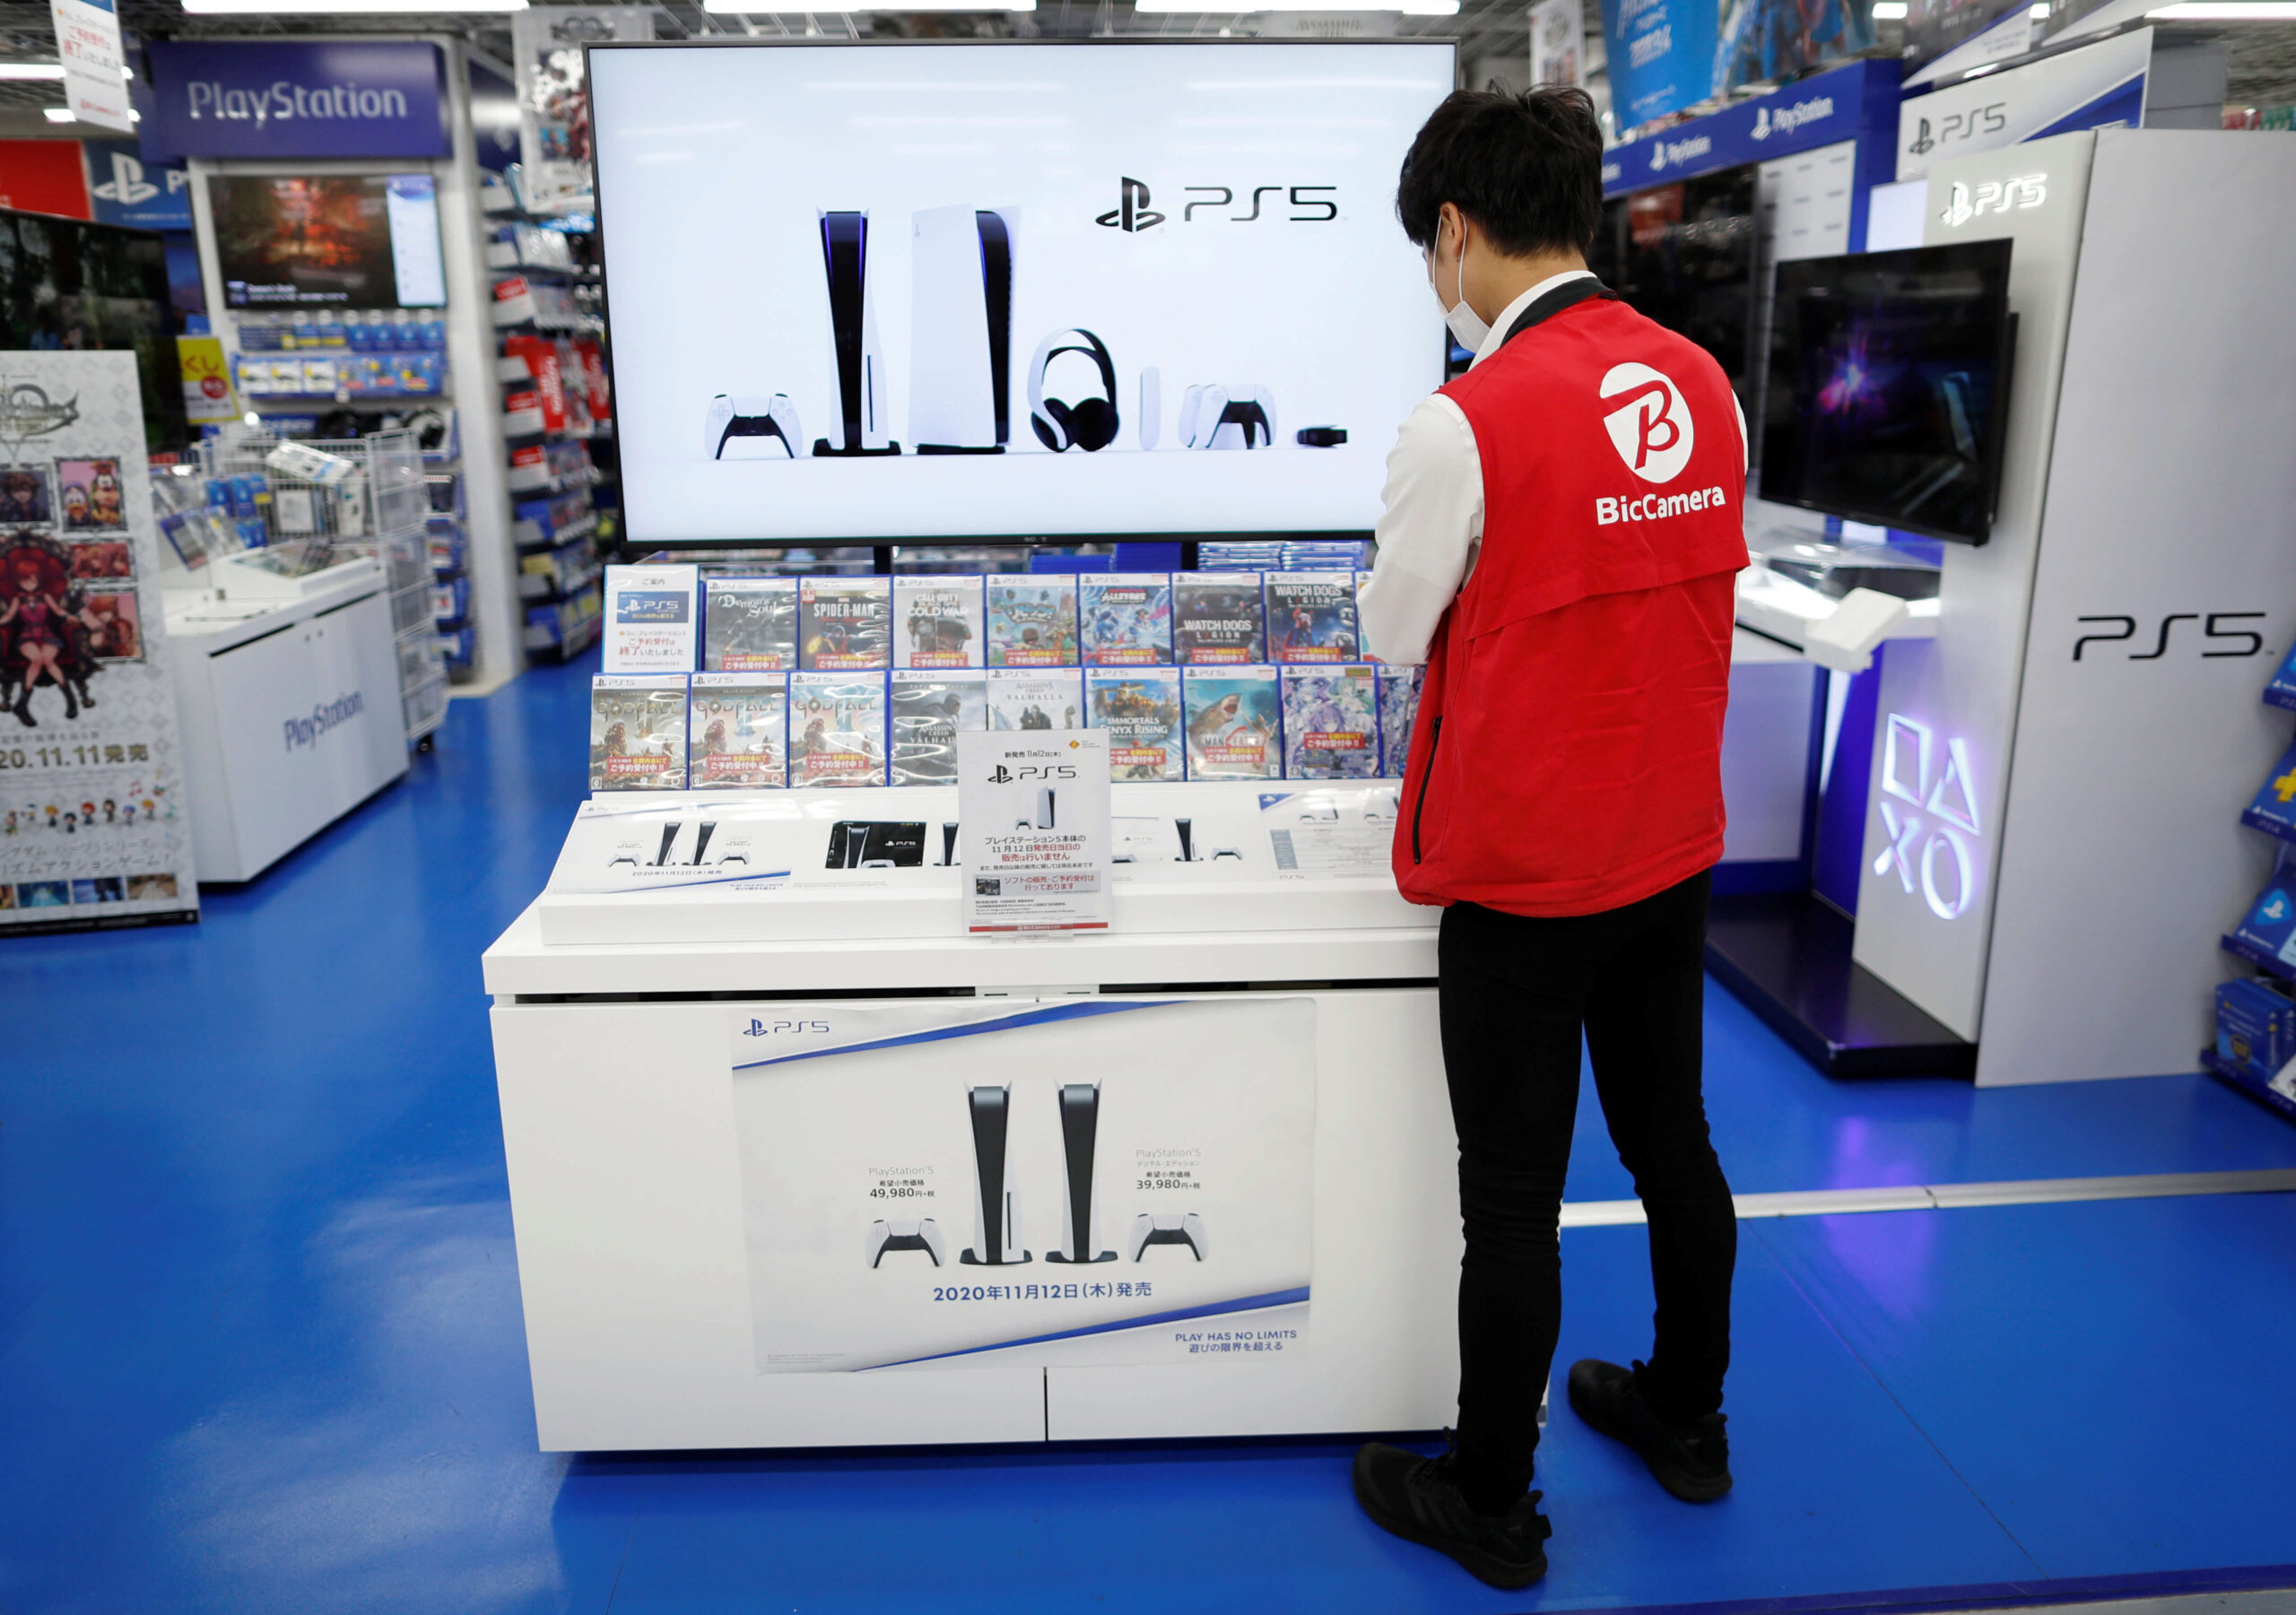 Sony shares slide after earnings highlight concern about games, sensors